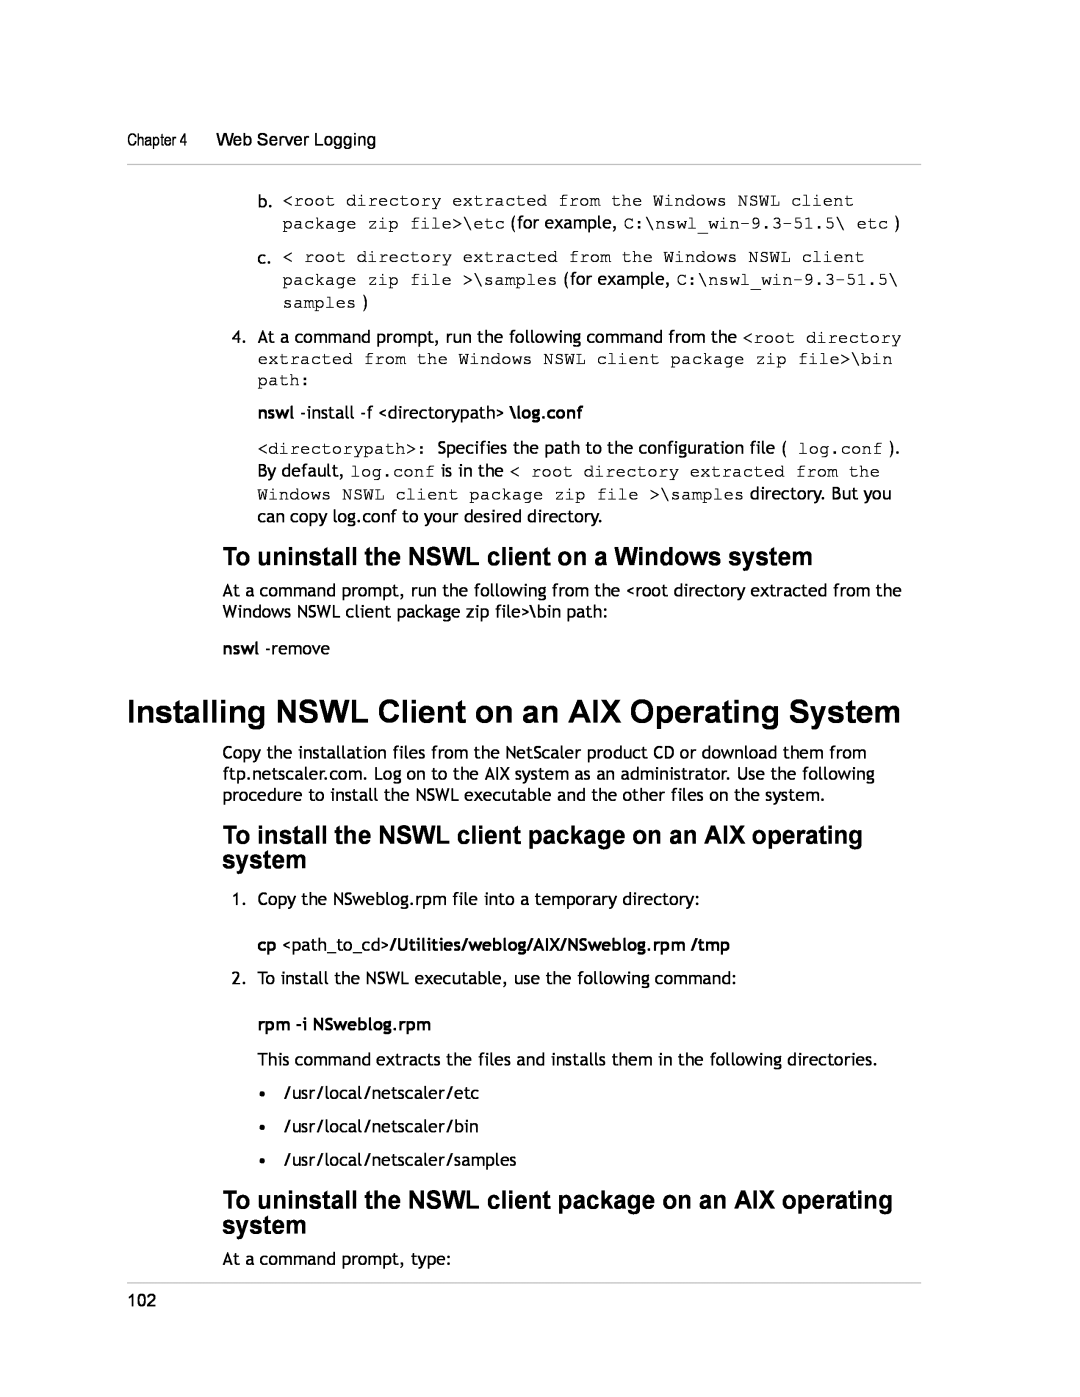 Citrix Systems CITRIX NETSCALER 9.3 manual Installing NSWL Client on an AIX Operating System, rpm -i NSweblog.rpm 